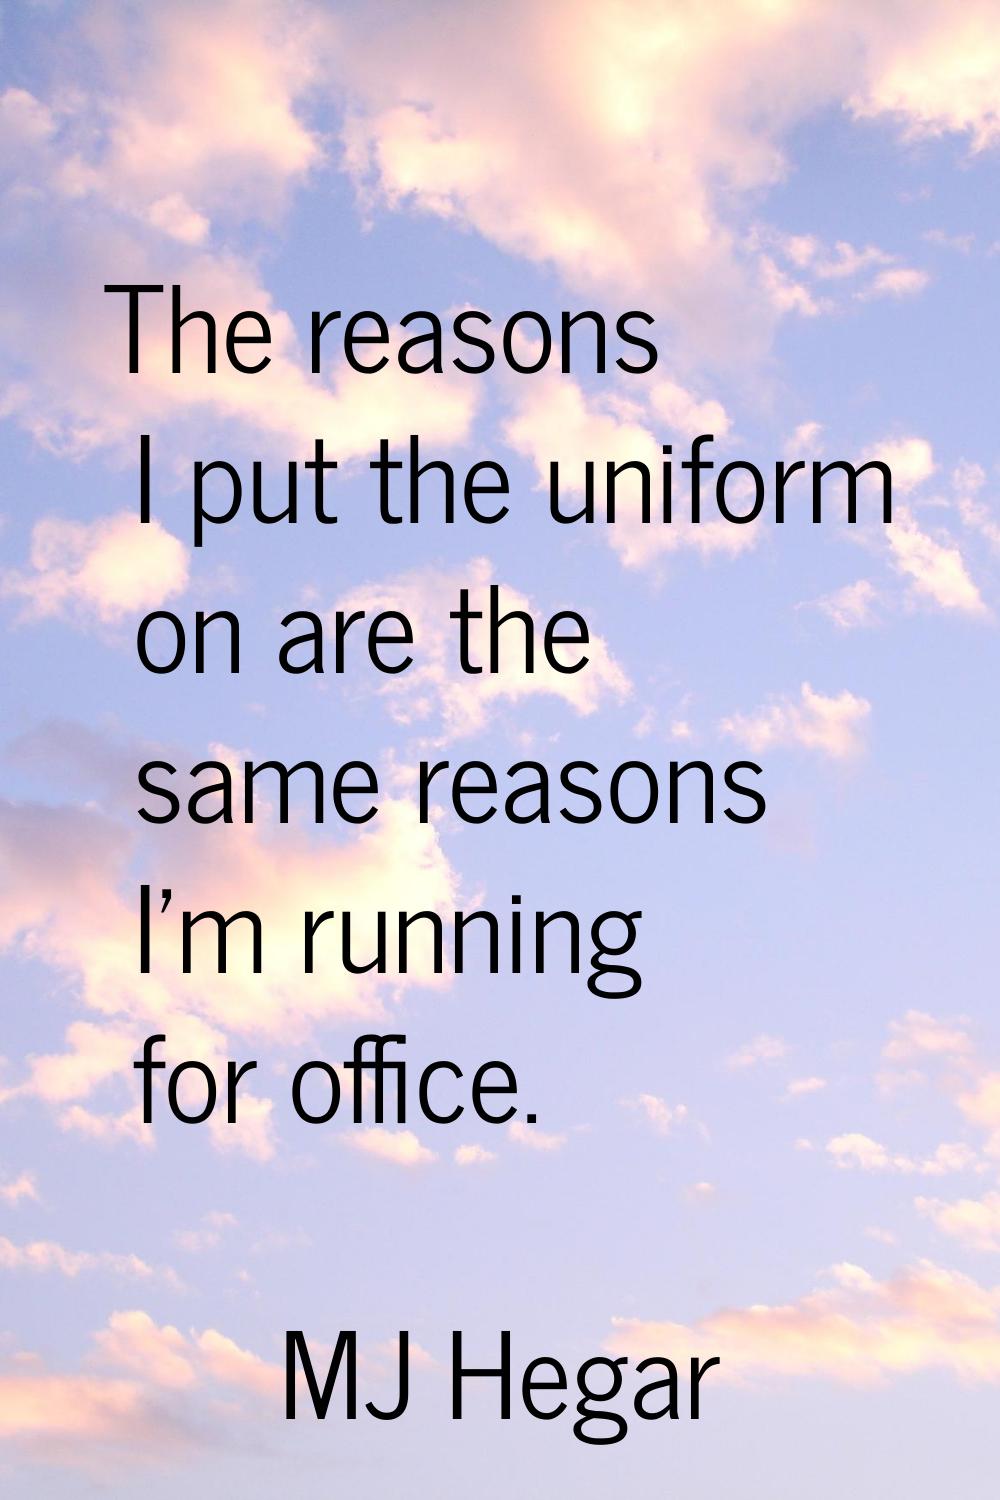 The reasons I put the uniform on are the same reasons I'm running for office.